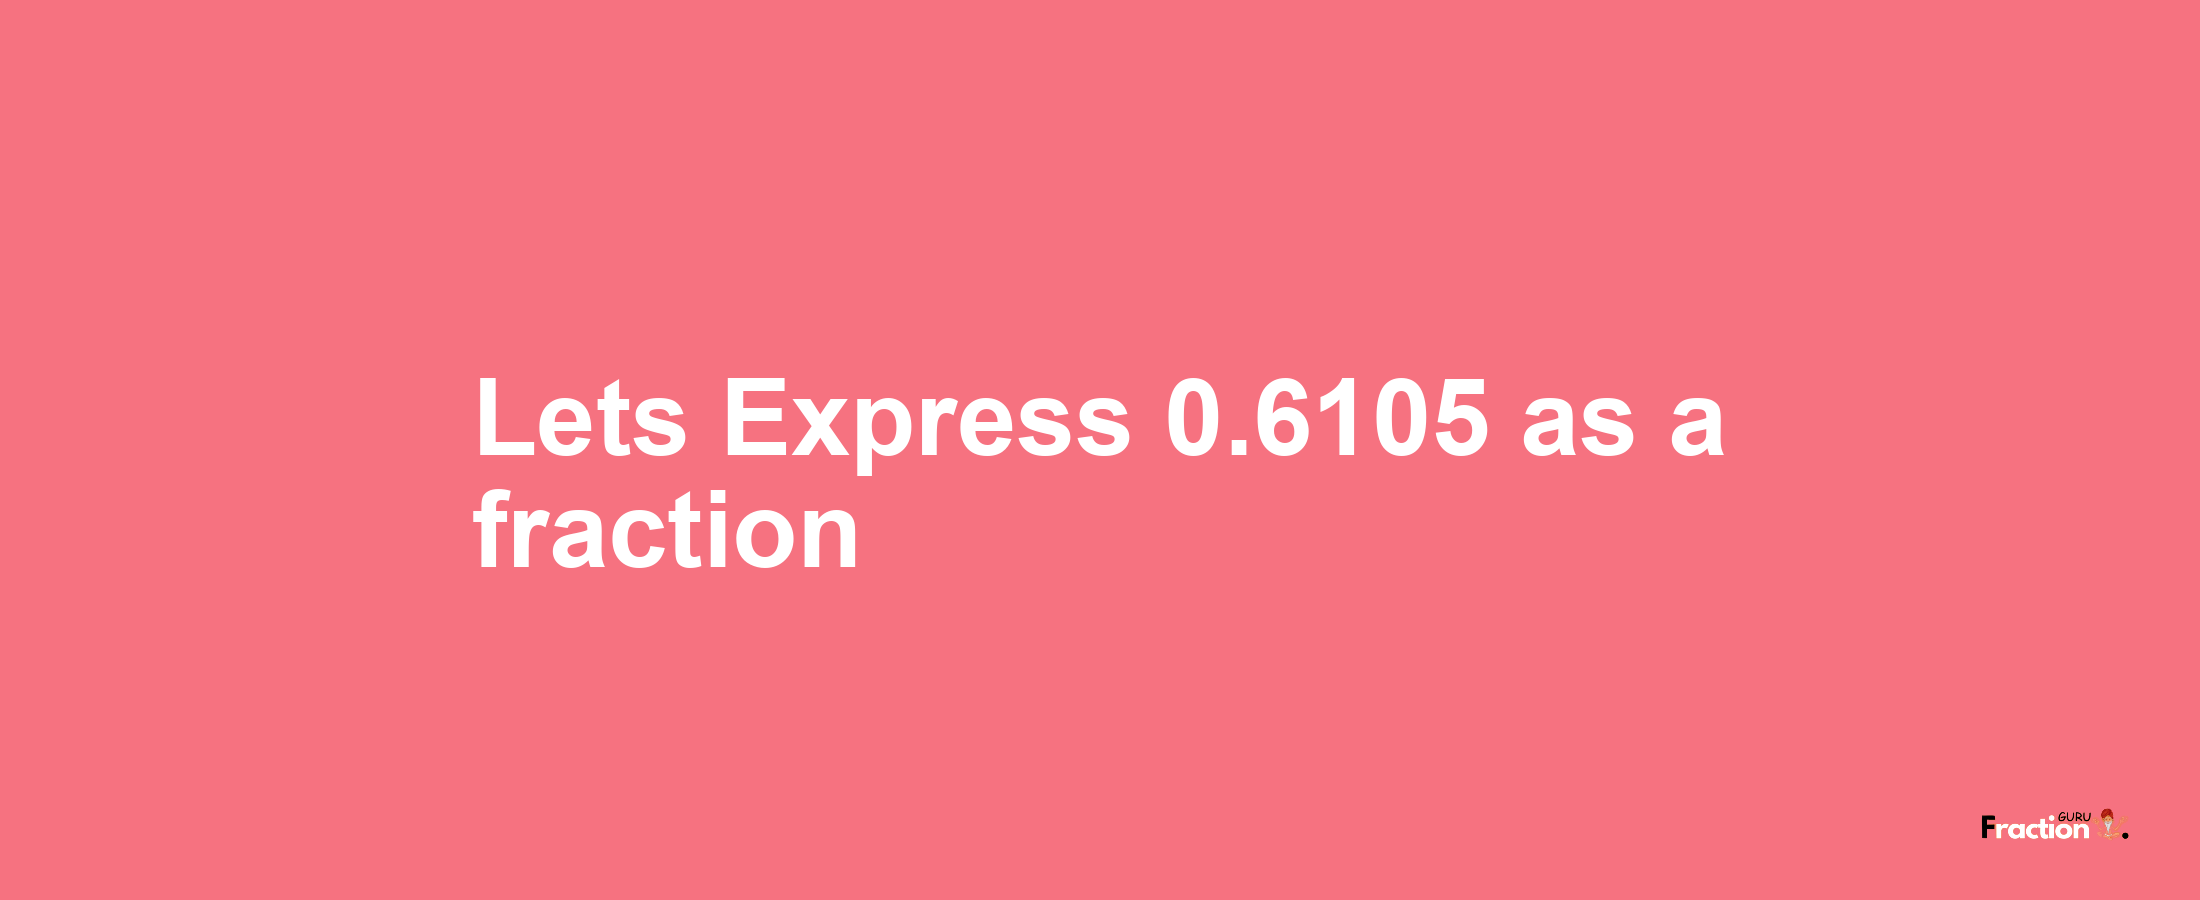 Lets Express 0.6105 as afraction